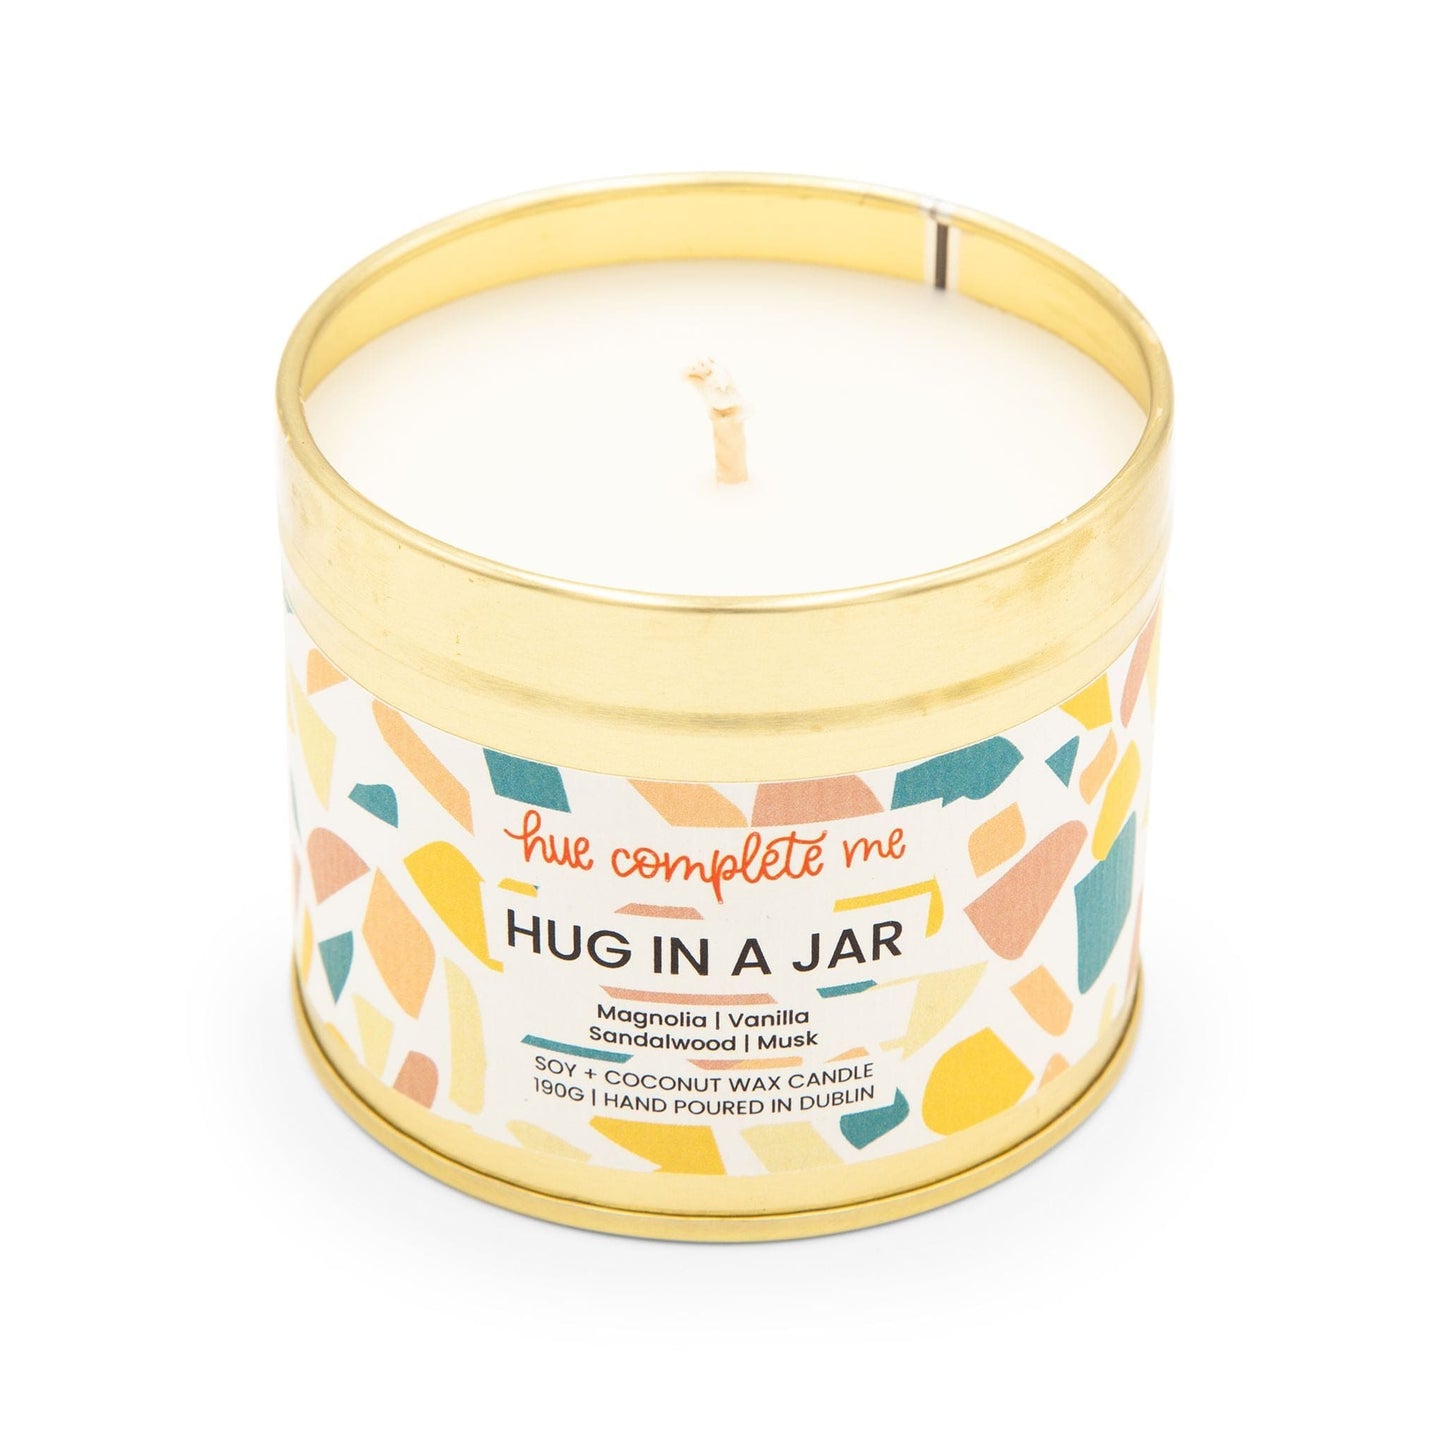 Hue Complete Me Candles Hug in a Jar Candle - 190g/30 hours